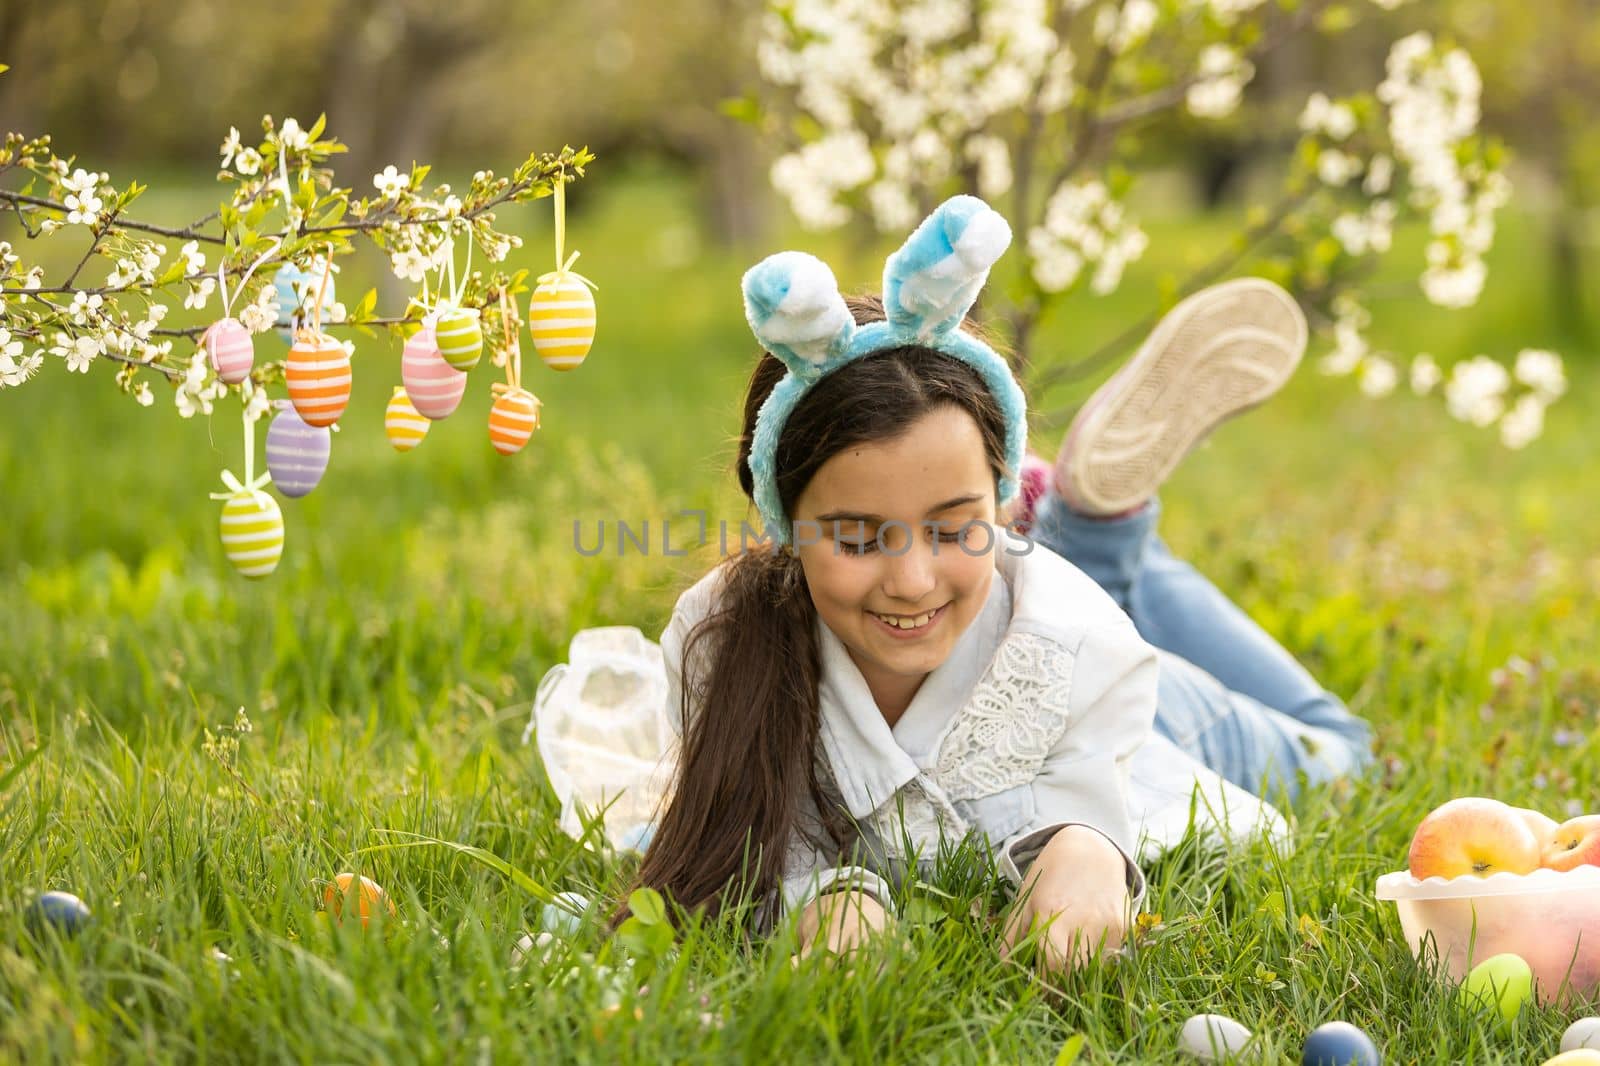 Adorable little girl in bunny ears, blooming tree branch outdoors on a spring day. Kid having fun on Easter egg hunt in the garden by Andelov13